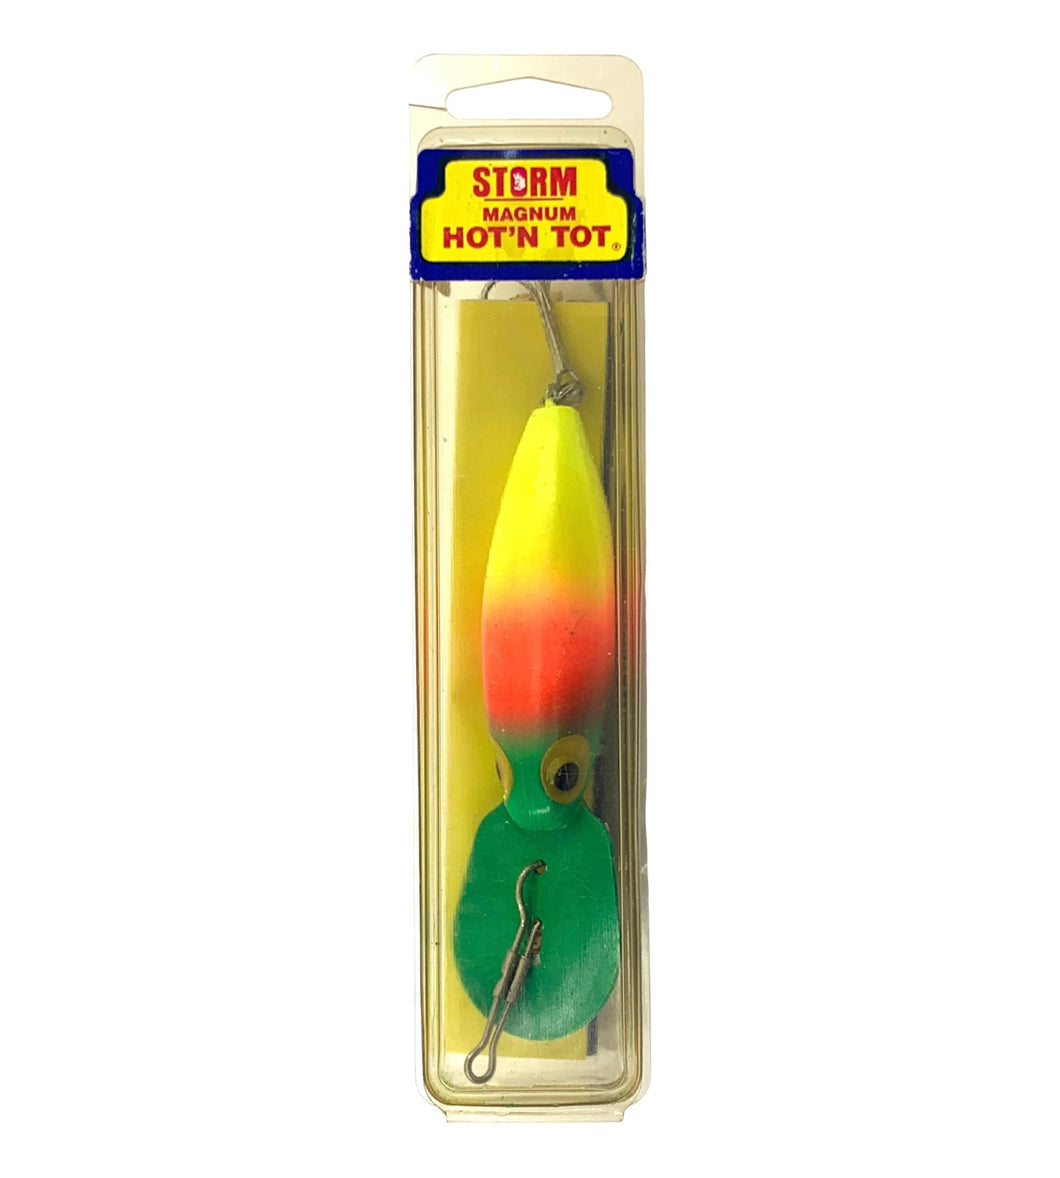 Front View of STORM LURES Magnum Hot'N Tot Fishing Lure in Parrot. For Sale at TOAD TACKLE.